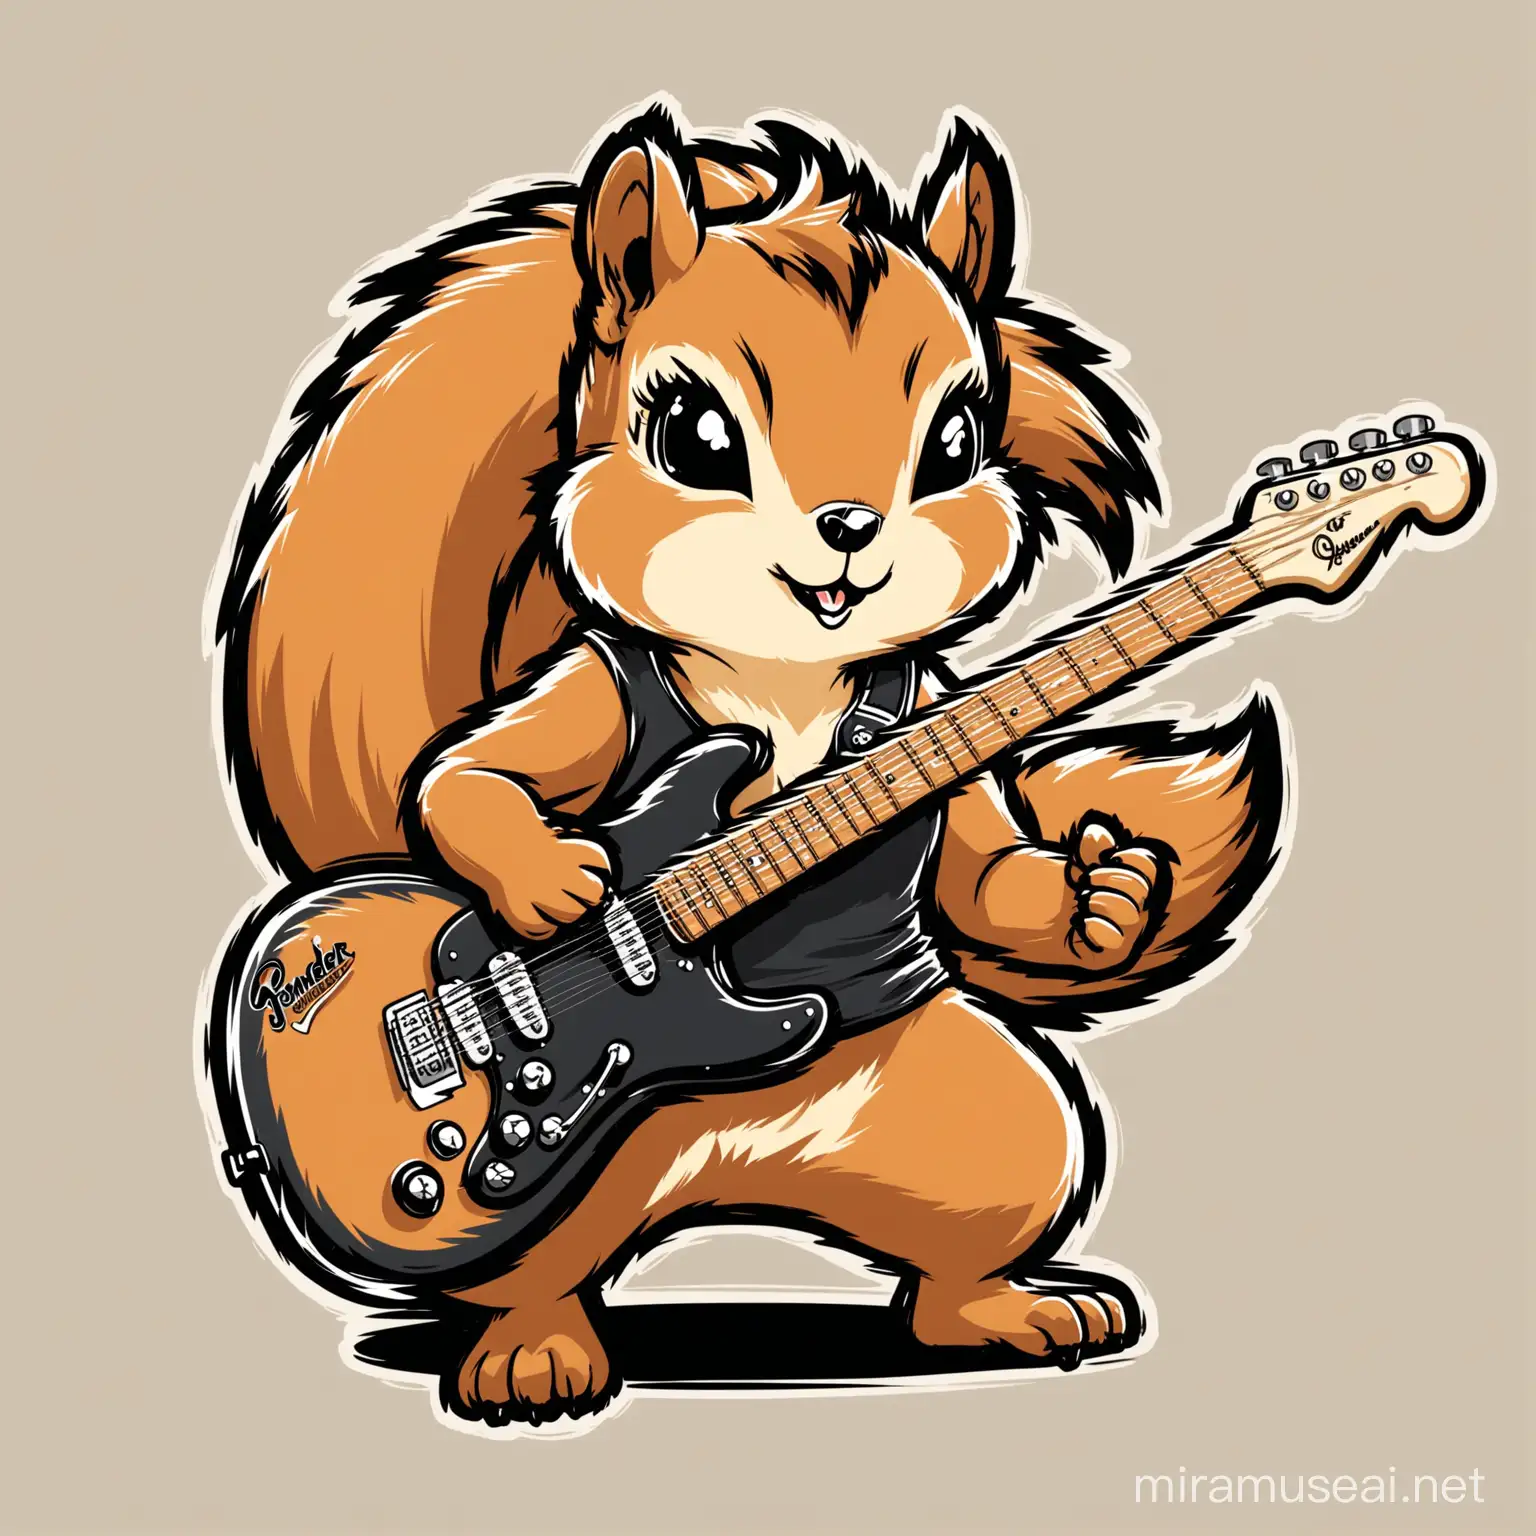 squirrel in a metal band in the style of queen of the stone age , drawing, cartoon style, metalhead, guitar, fender, squirell plaing guitar, metalhead squirell, queen of the stone age artwork, queen of the stone age, blank background, logo, stickers